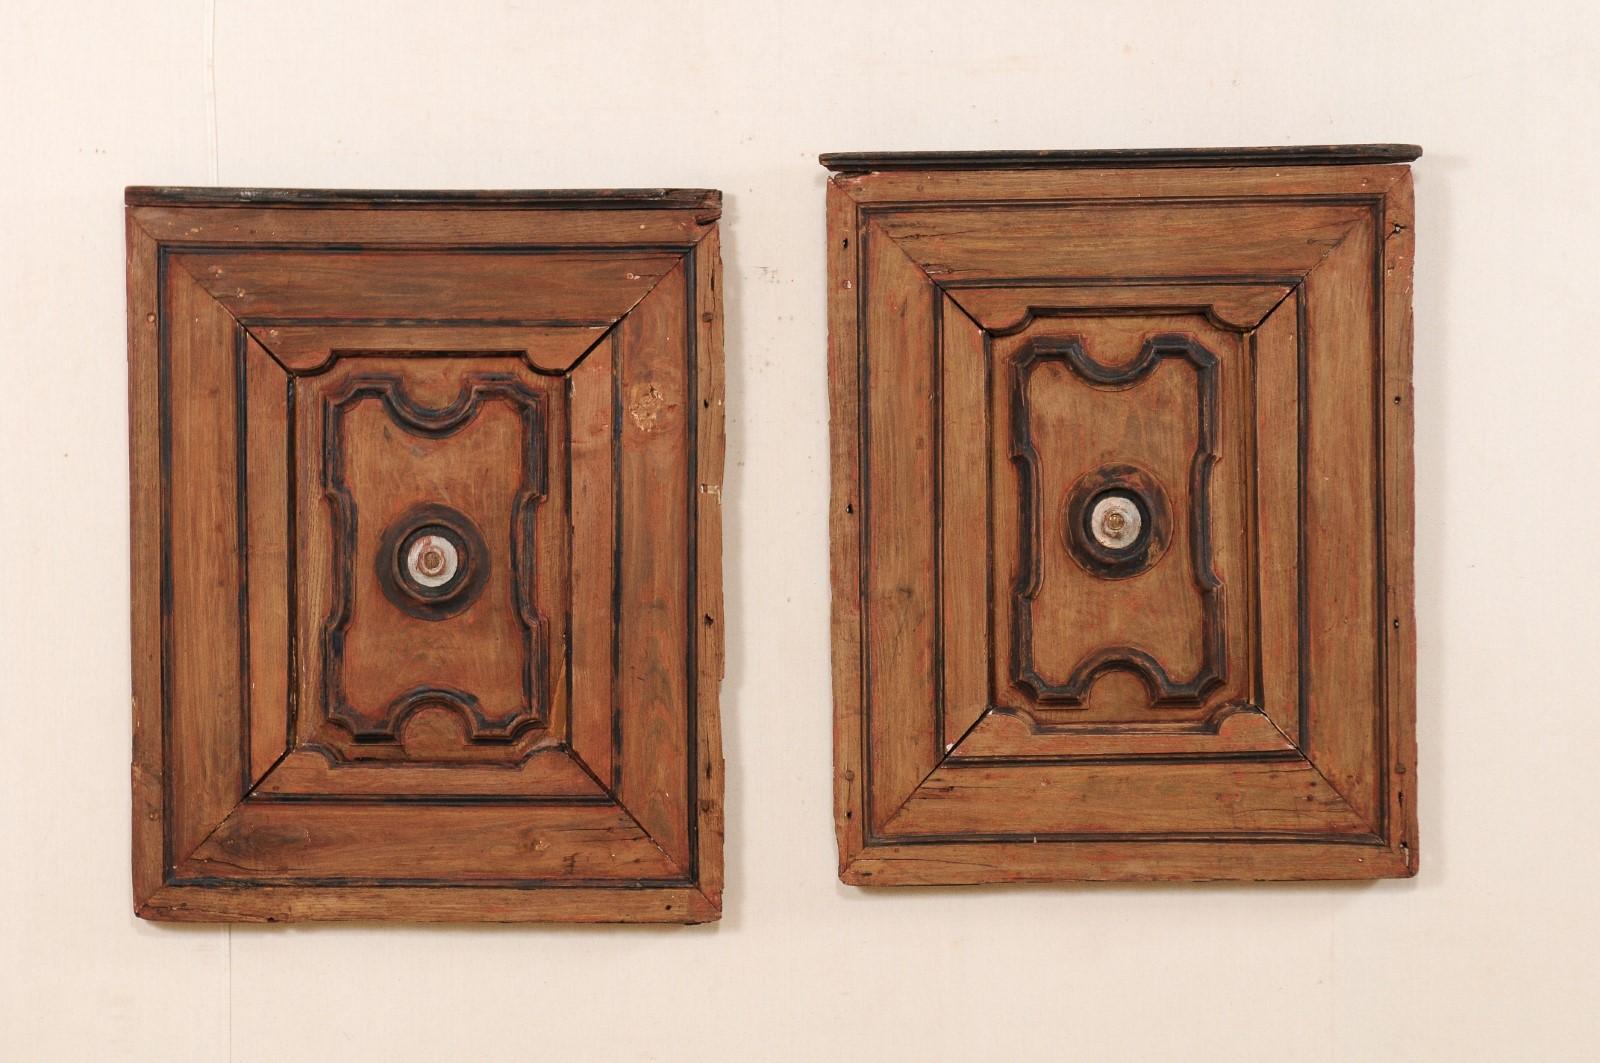 A pair of Italian decorative wall panels from the turn of the 18th and 19th century. This pair of antique wall decorations from Italy, each approximately 3 feet in height, feature a molded frame with raised panel center with curvy geometric shape